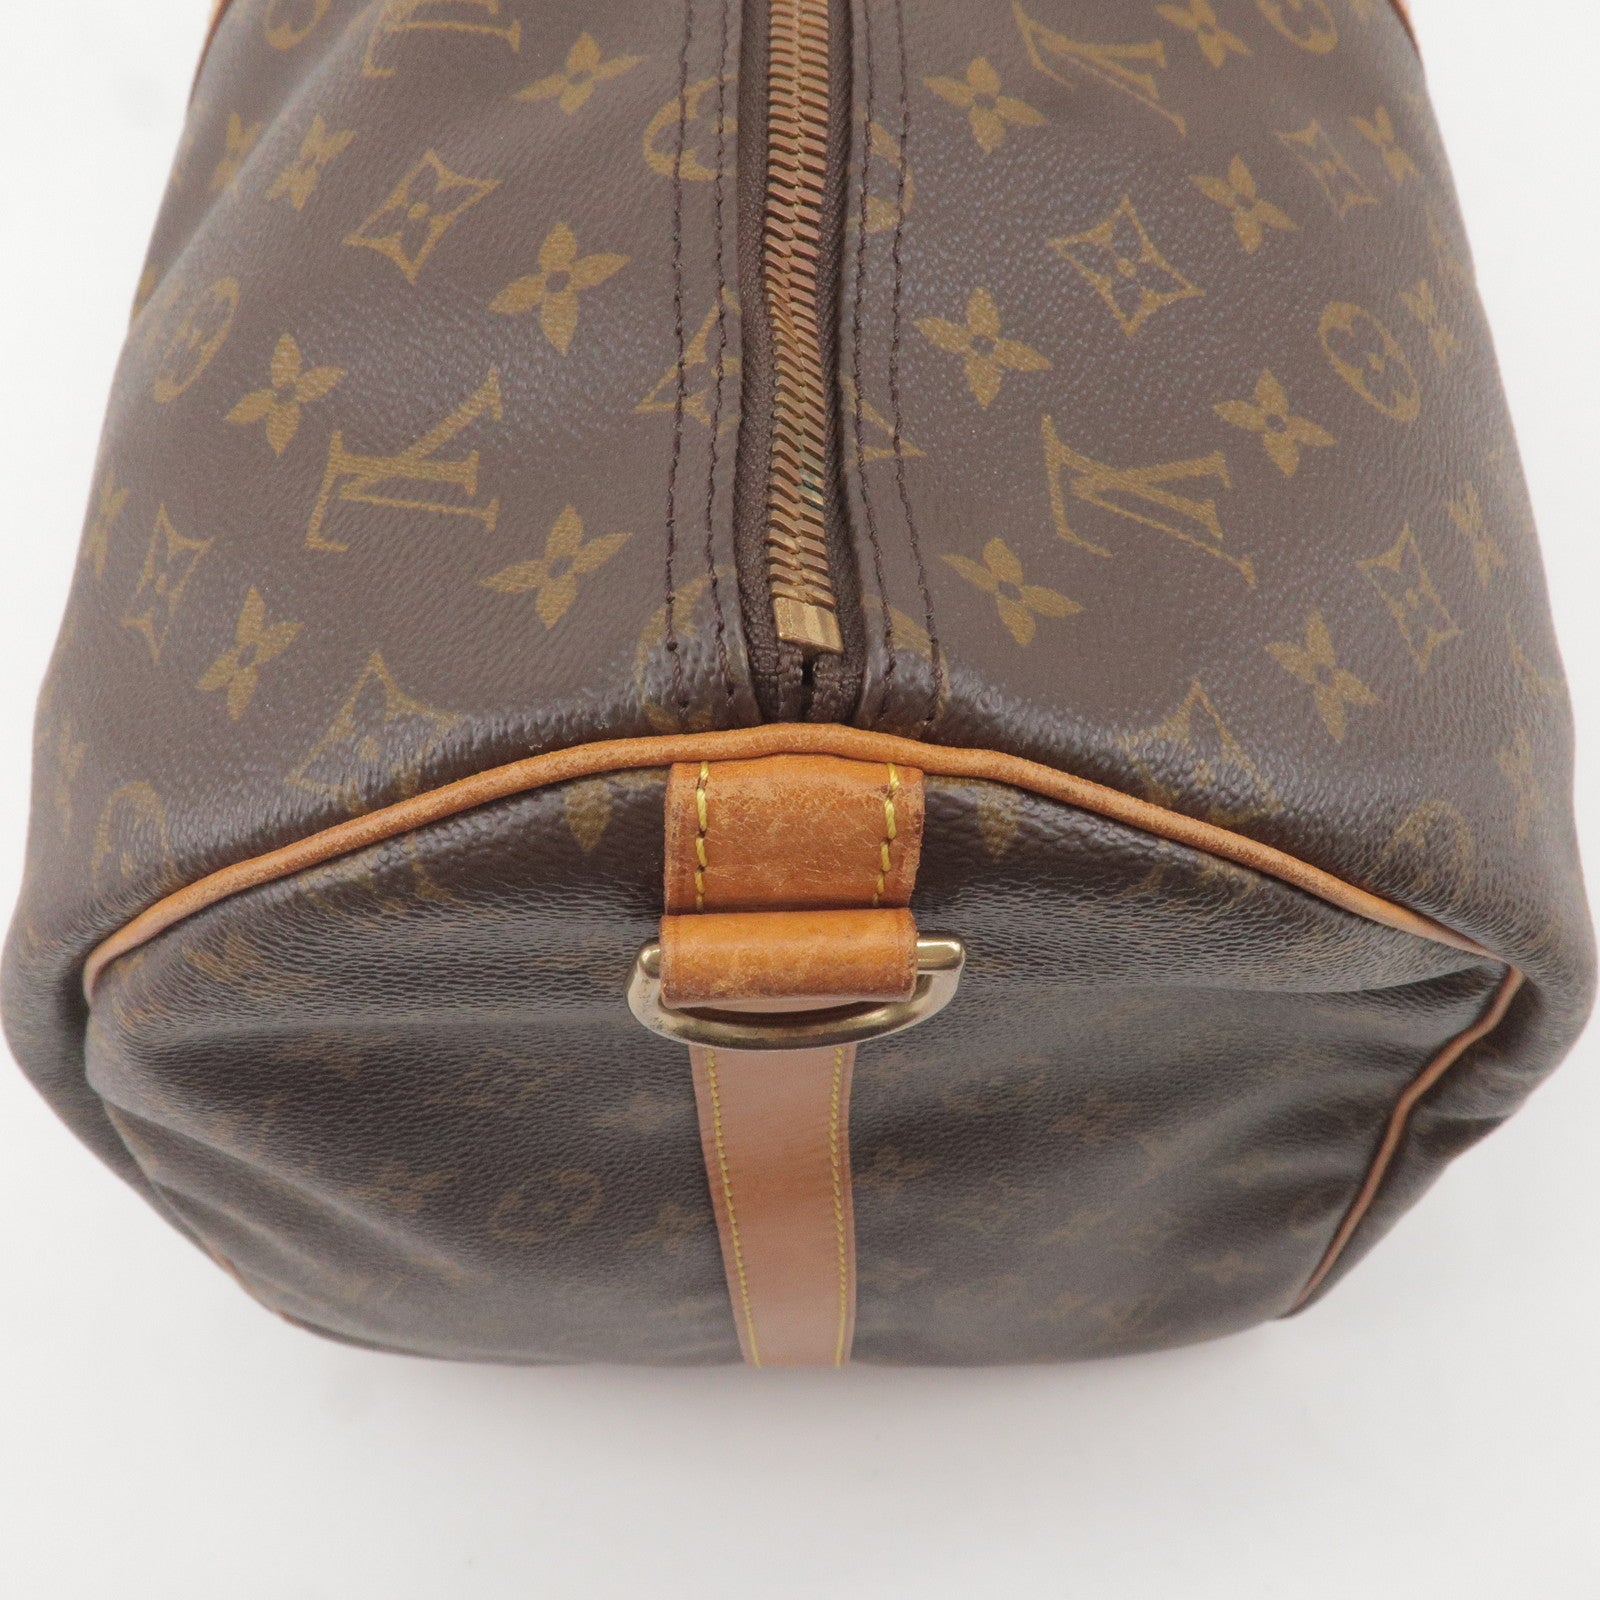 Louis Vuitton Monogram Canvas Keepall Bandoulière 50 - Handbag | Pre-owned & Certified | used Second Hand | Unisex